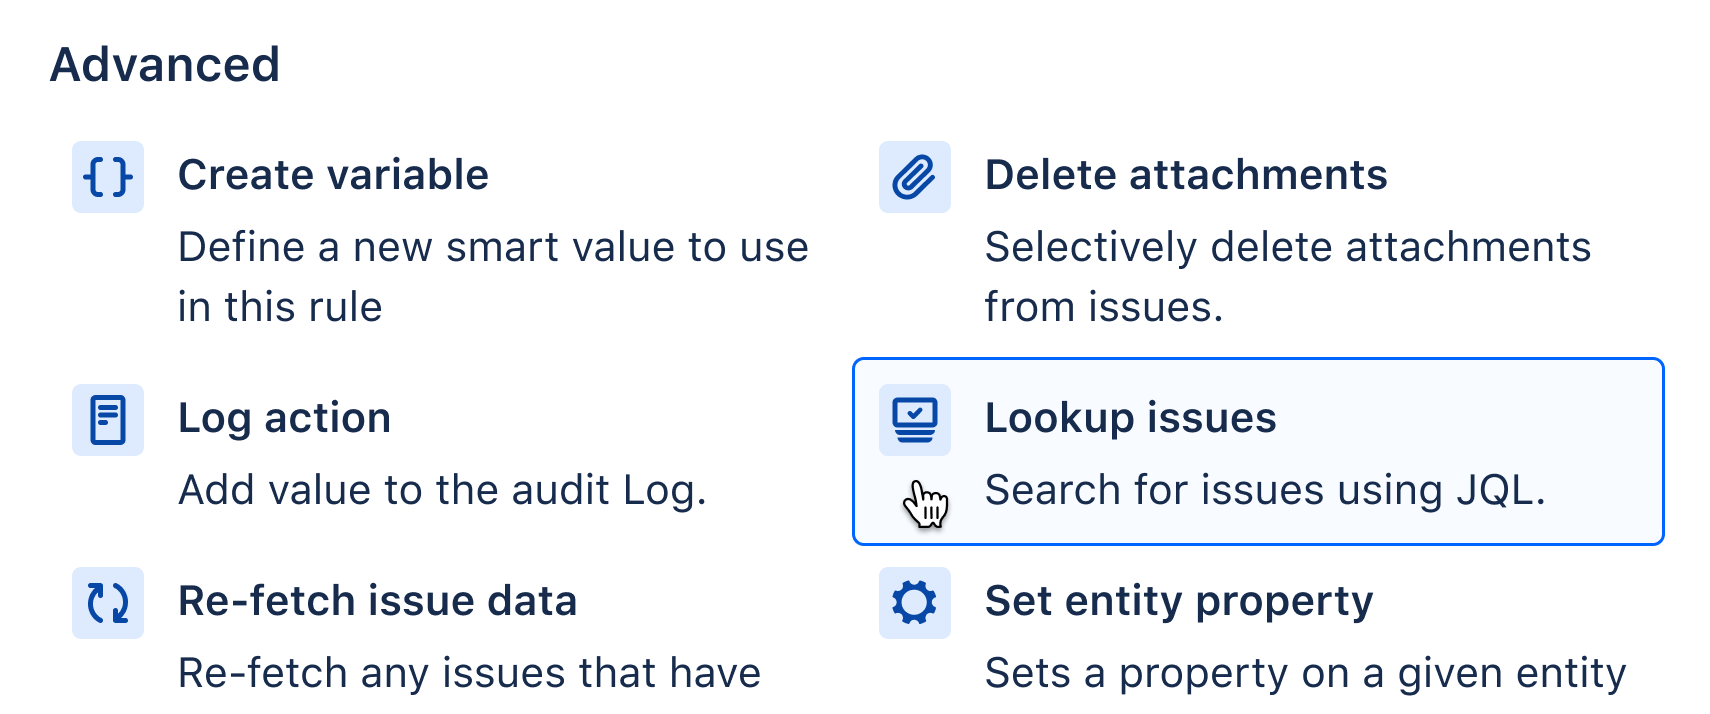 Selecting Lookup issue